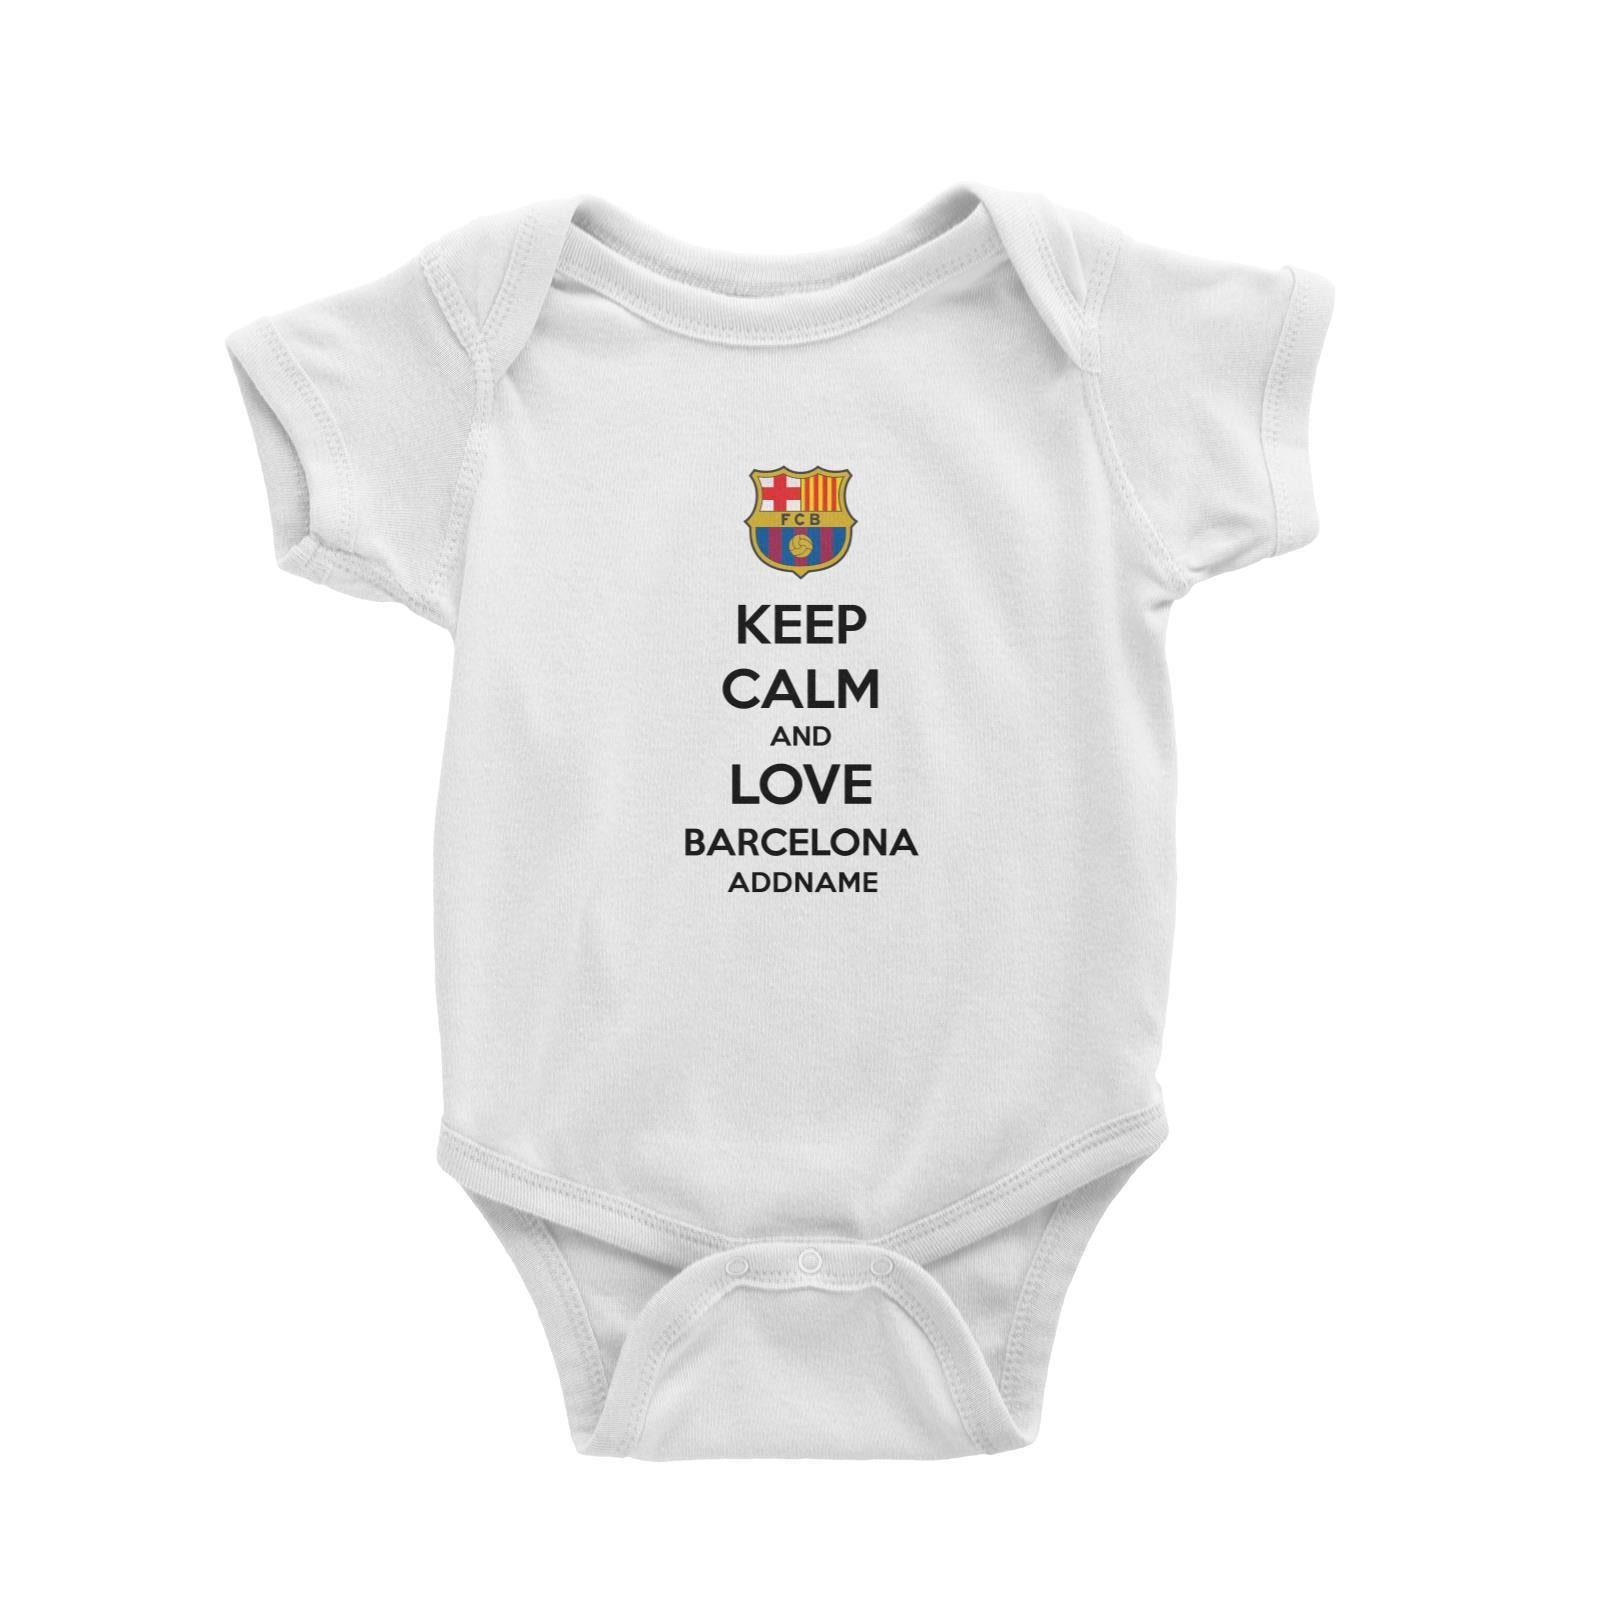 Barcelona Football Keep Calm And Love Series Addname Baby Romper